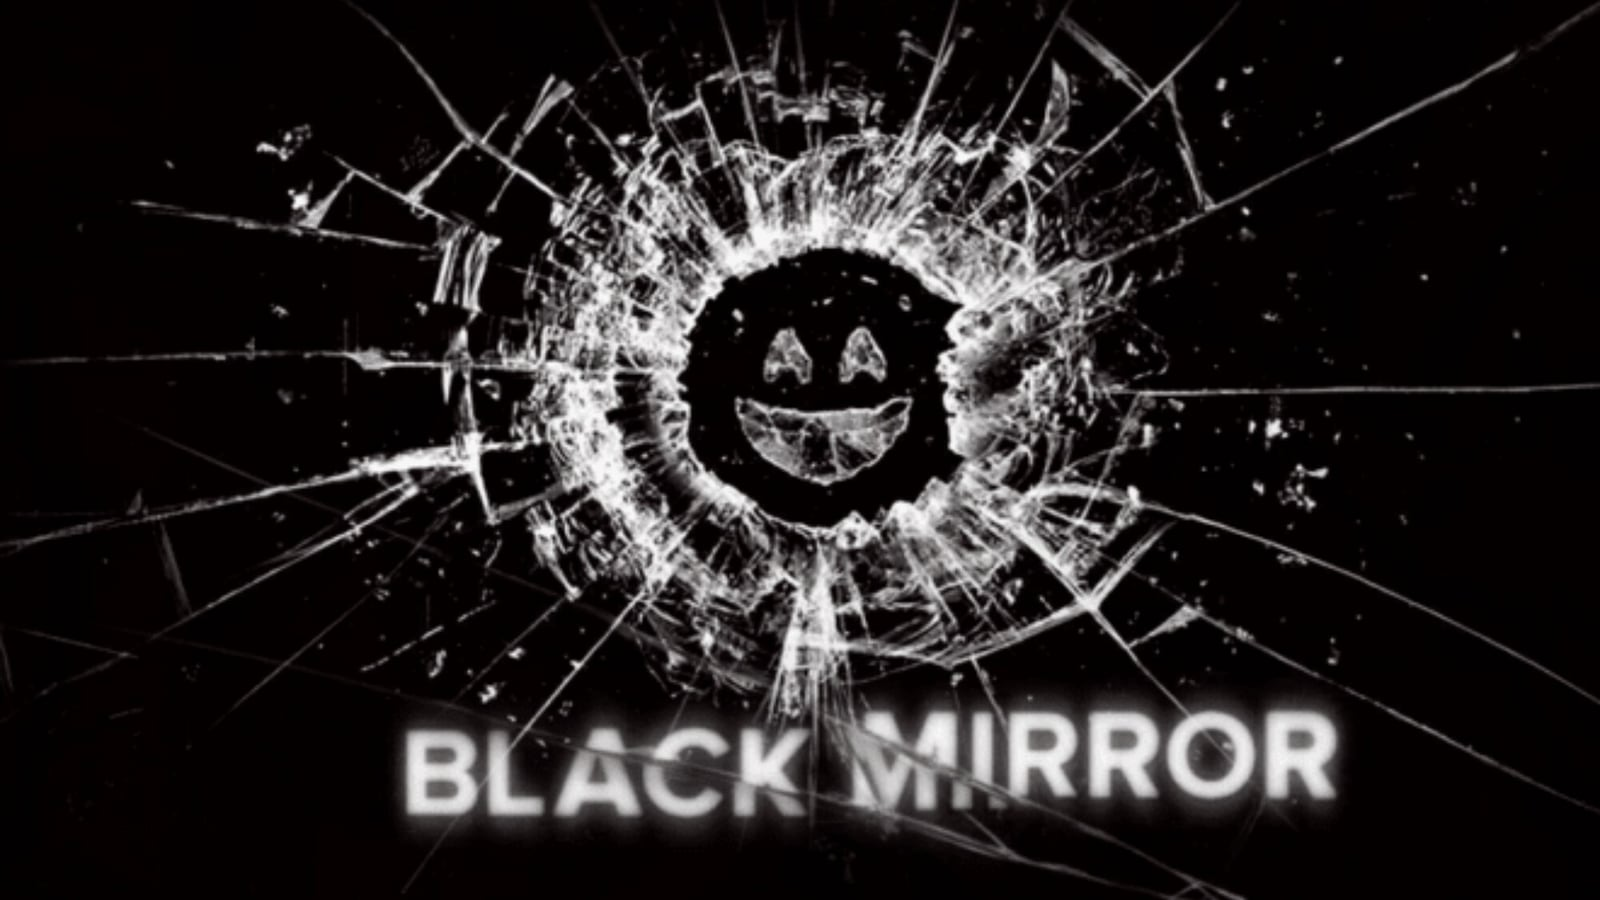 In the image, a rectangular glass surface is set against a dark backdrop. The glass is shattered, prominently broken at the center with fragments and cracks extending towards the margins. Within the central hole, forming a complete circle, three small glass pieces are arranged to create a smiling emoji. The word "Black Mirror" is inscribed in white beneath the image.